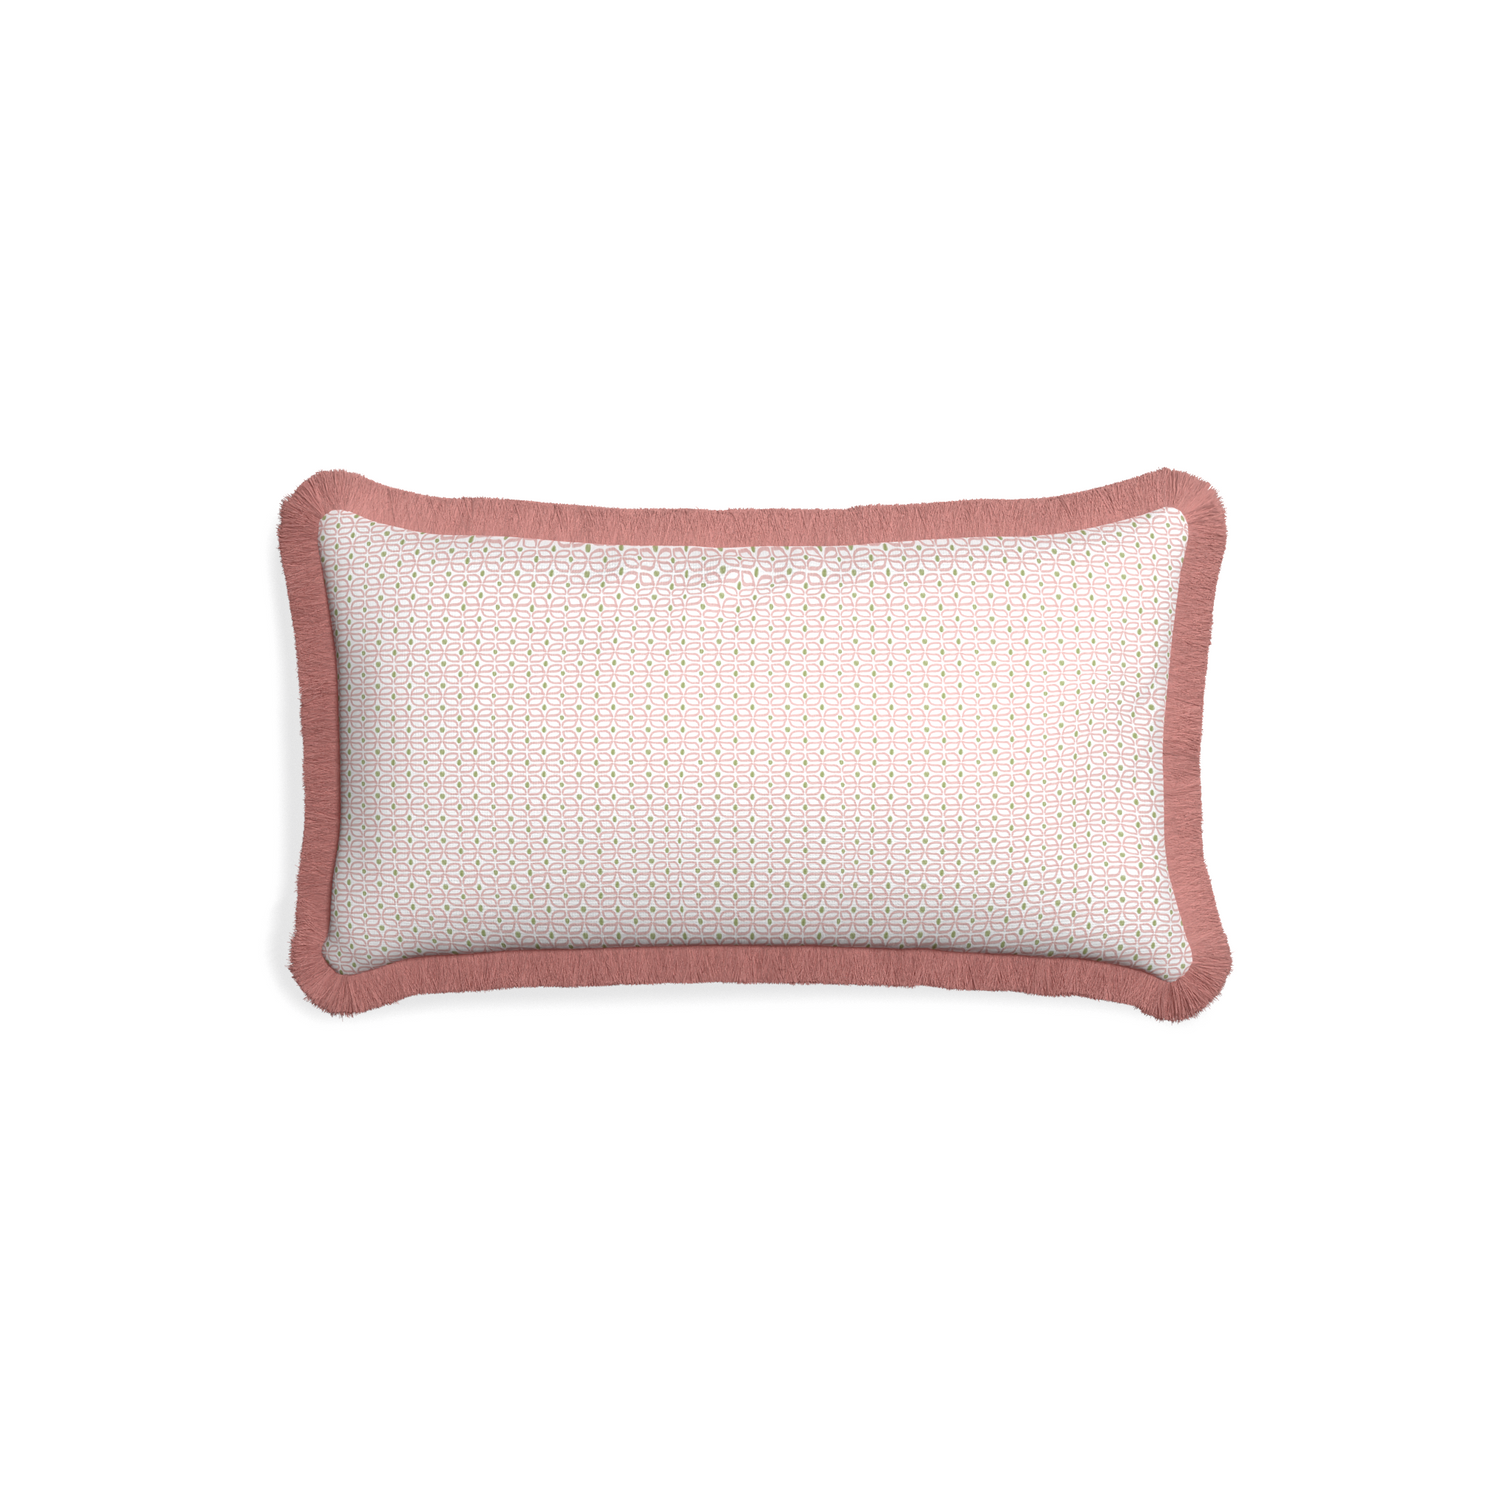 Petite-lumbar loomi pink custom pink geometricpillow with d fringe on white background